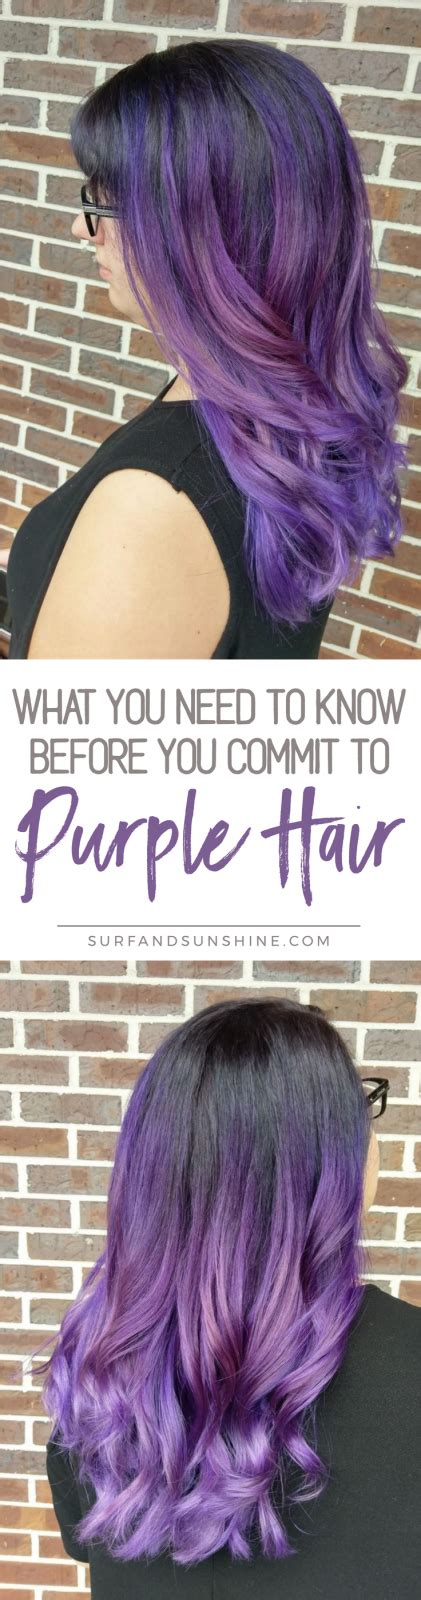 Important Things To Know Before You Dye Your Hair Purple Purple Hair